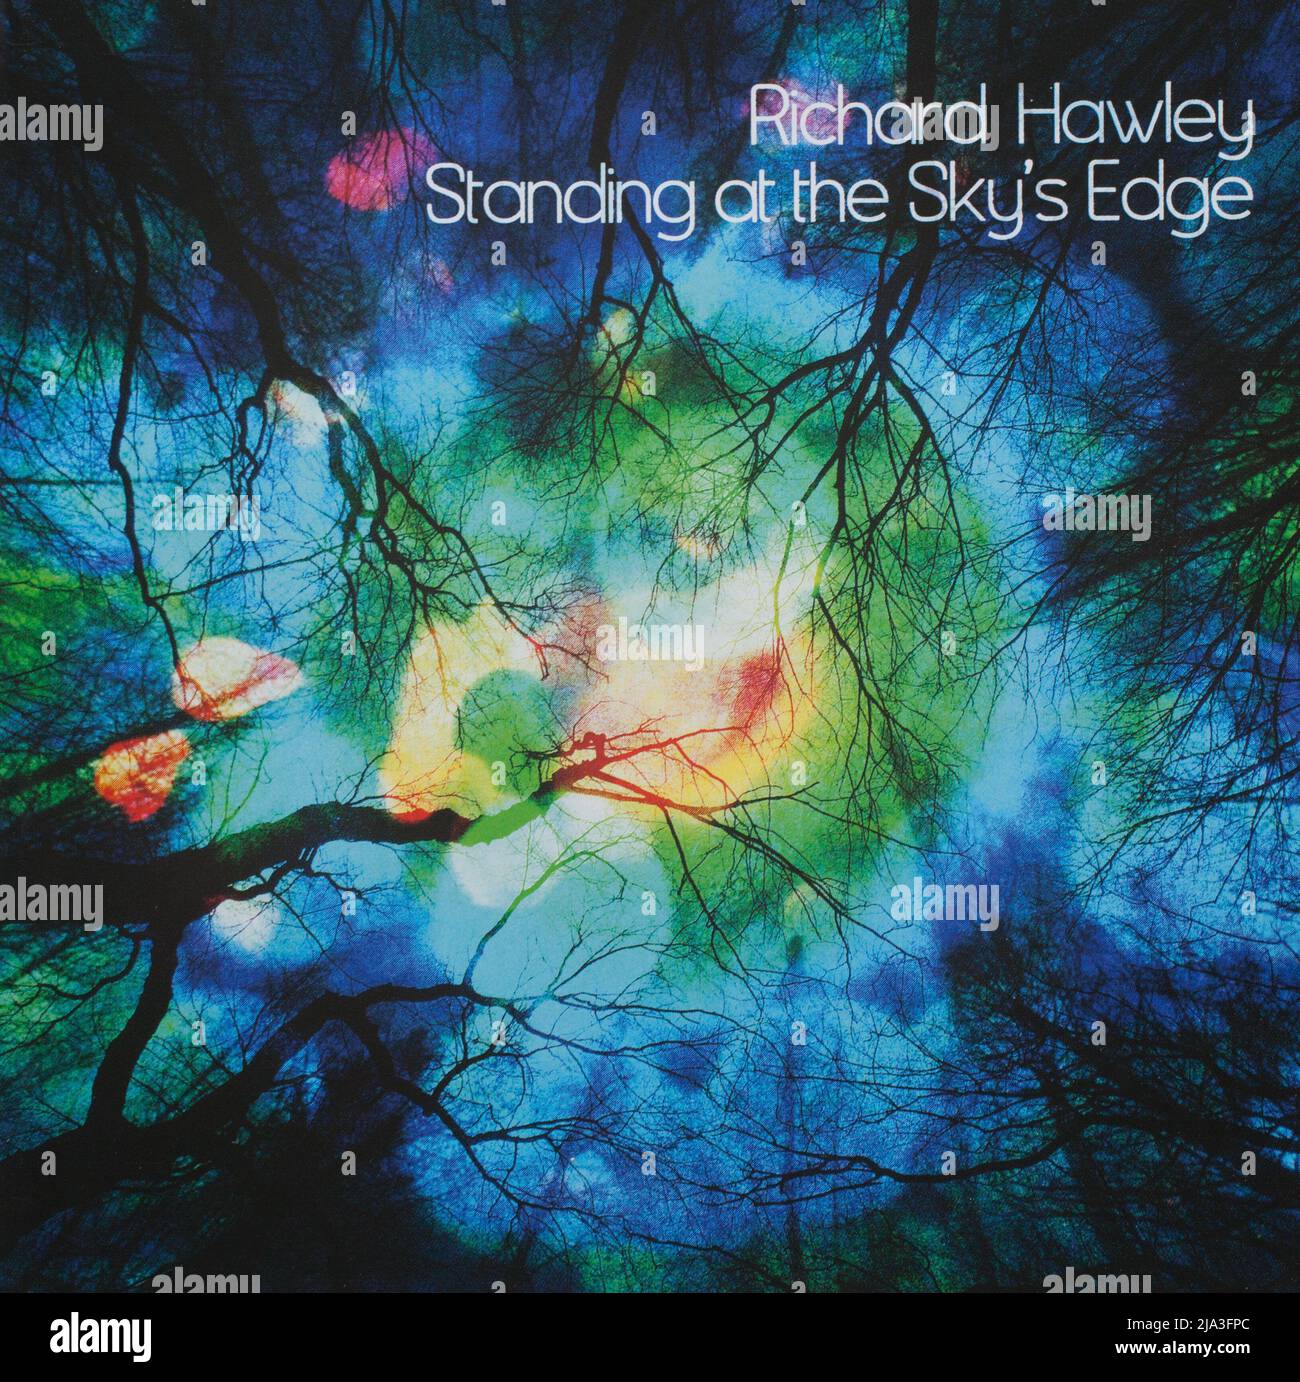 The cd album cover to, Standing at the Sky's Edge by Richard Hawley Stock Photo